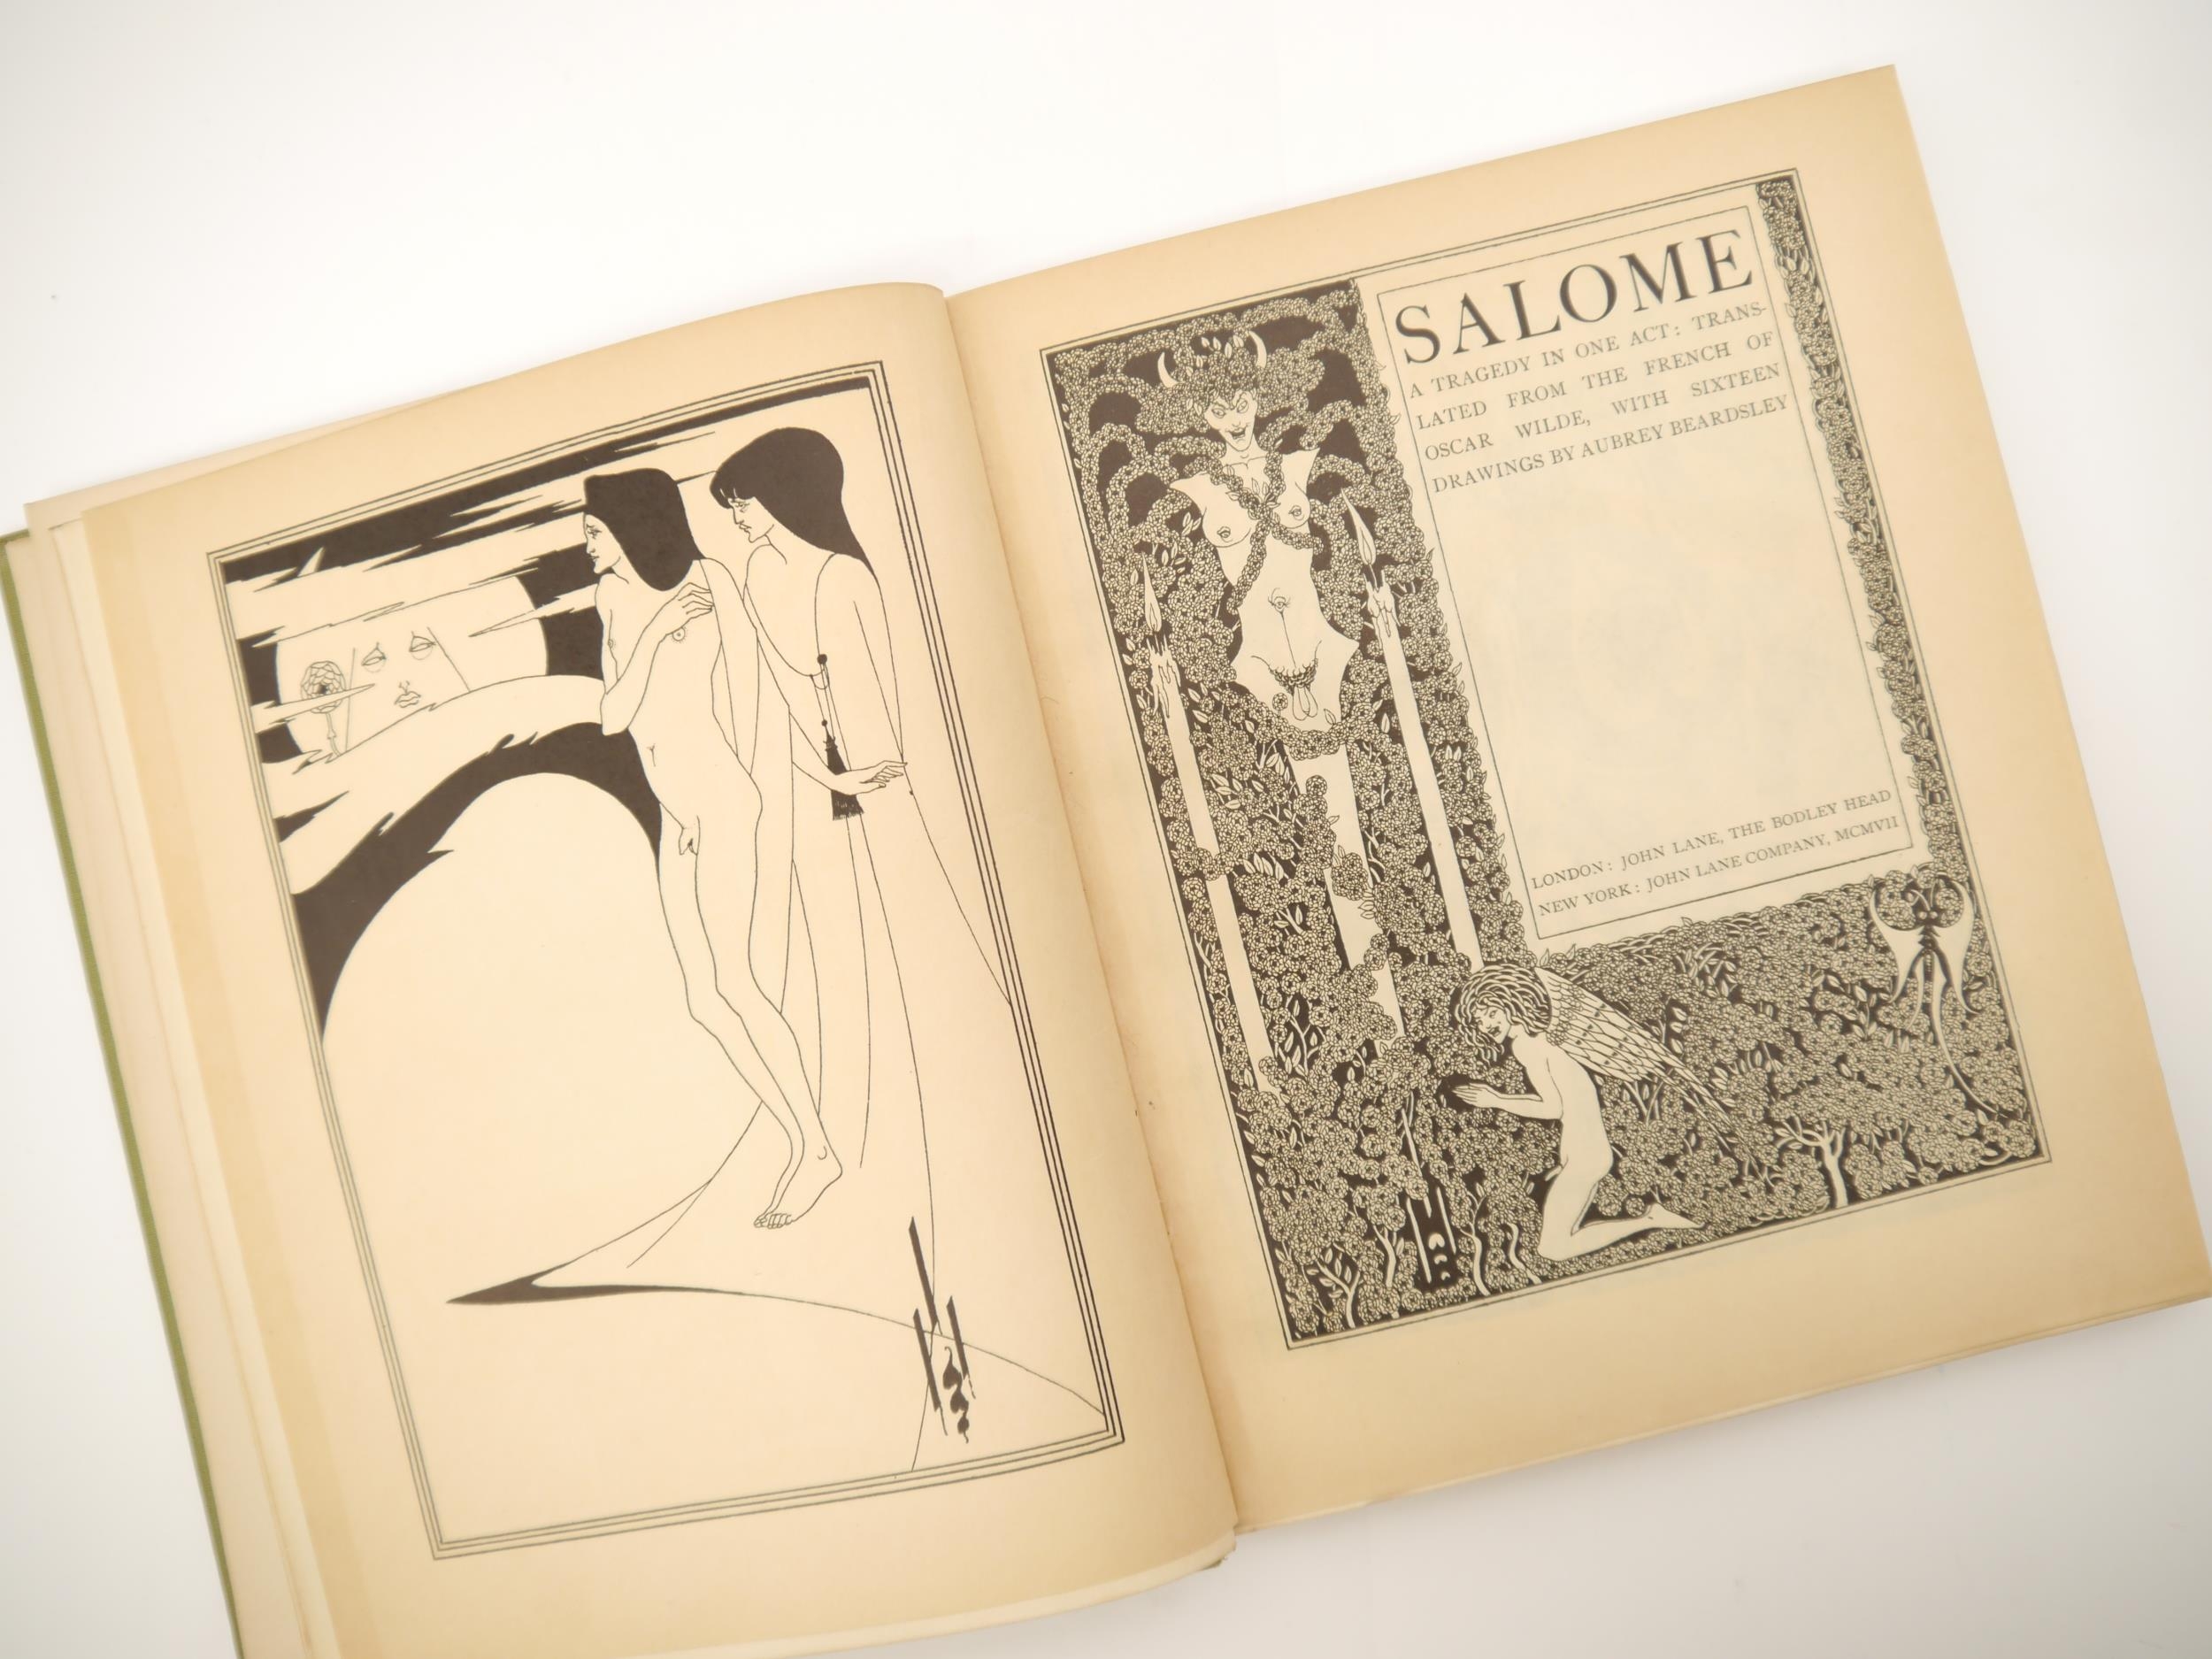 Oscar Wilde; Aubrey Beardsley (illustrator): 'Salome: A Tragedy in One Act: Translated from the - Image 2 of 3